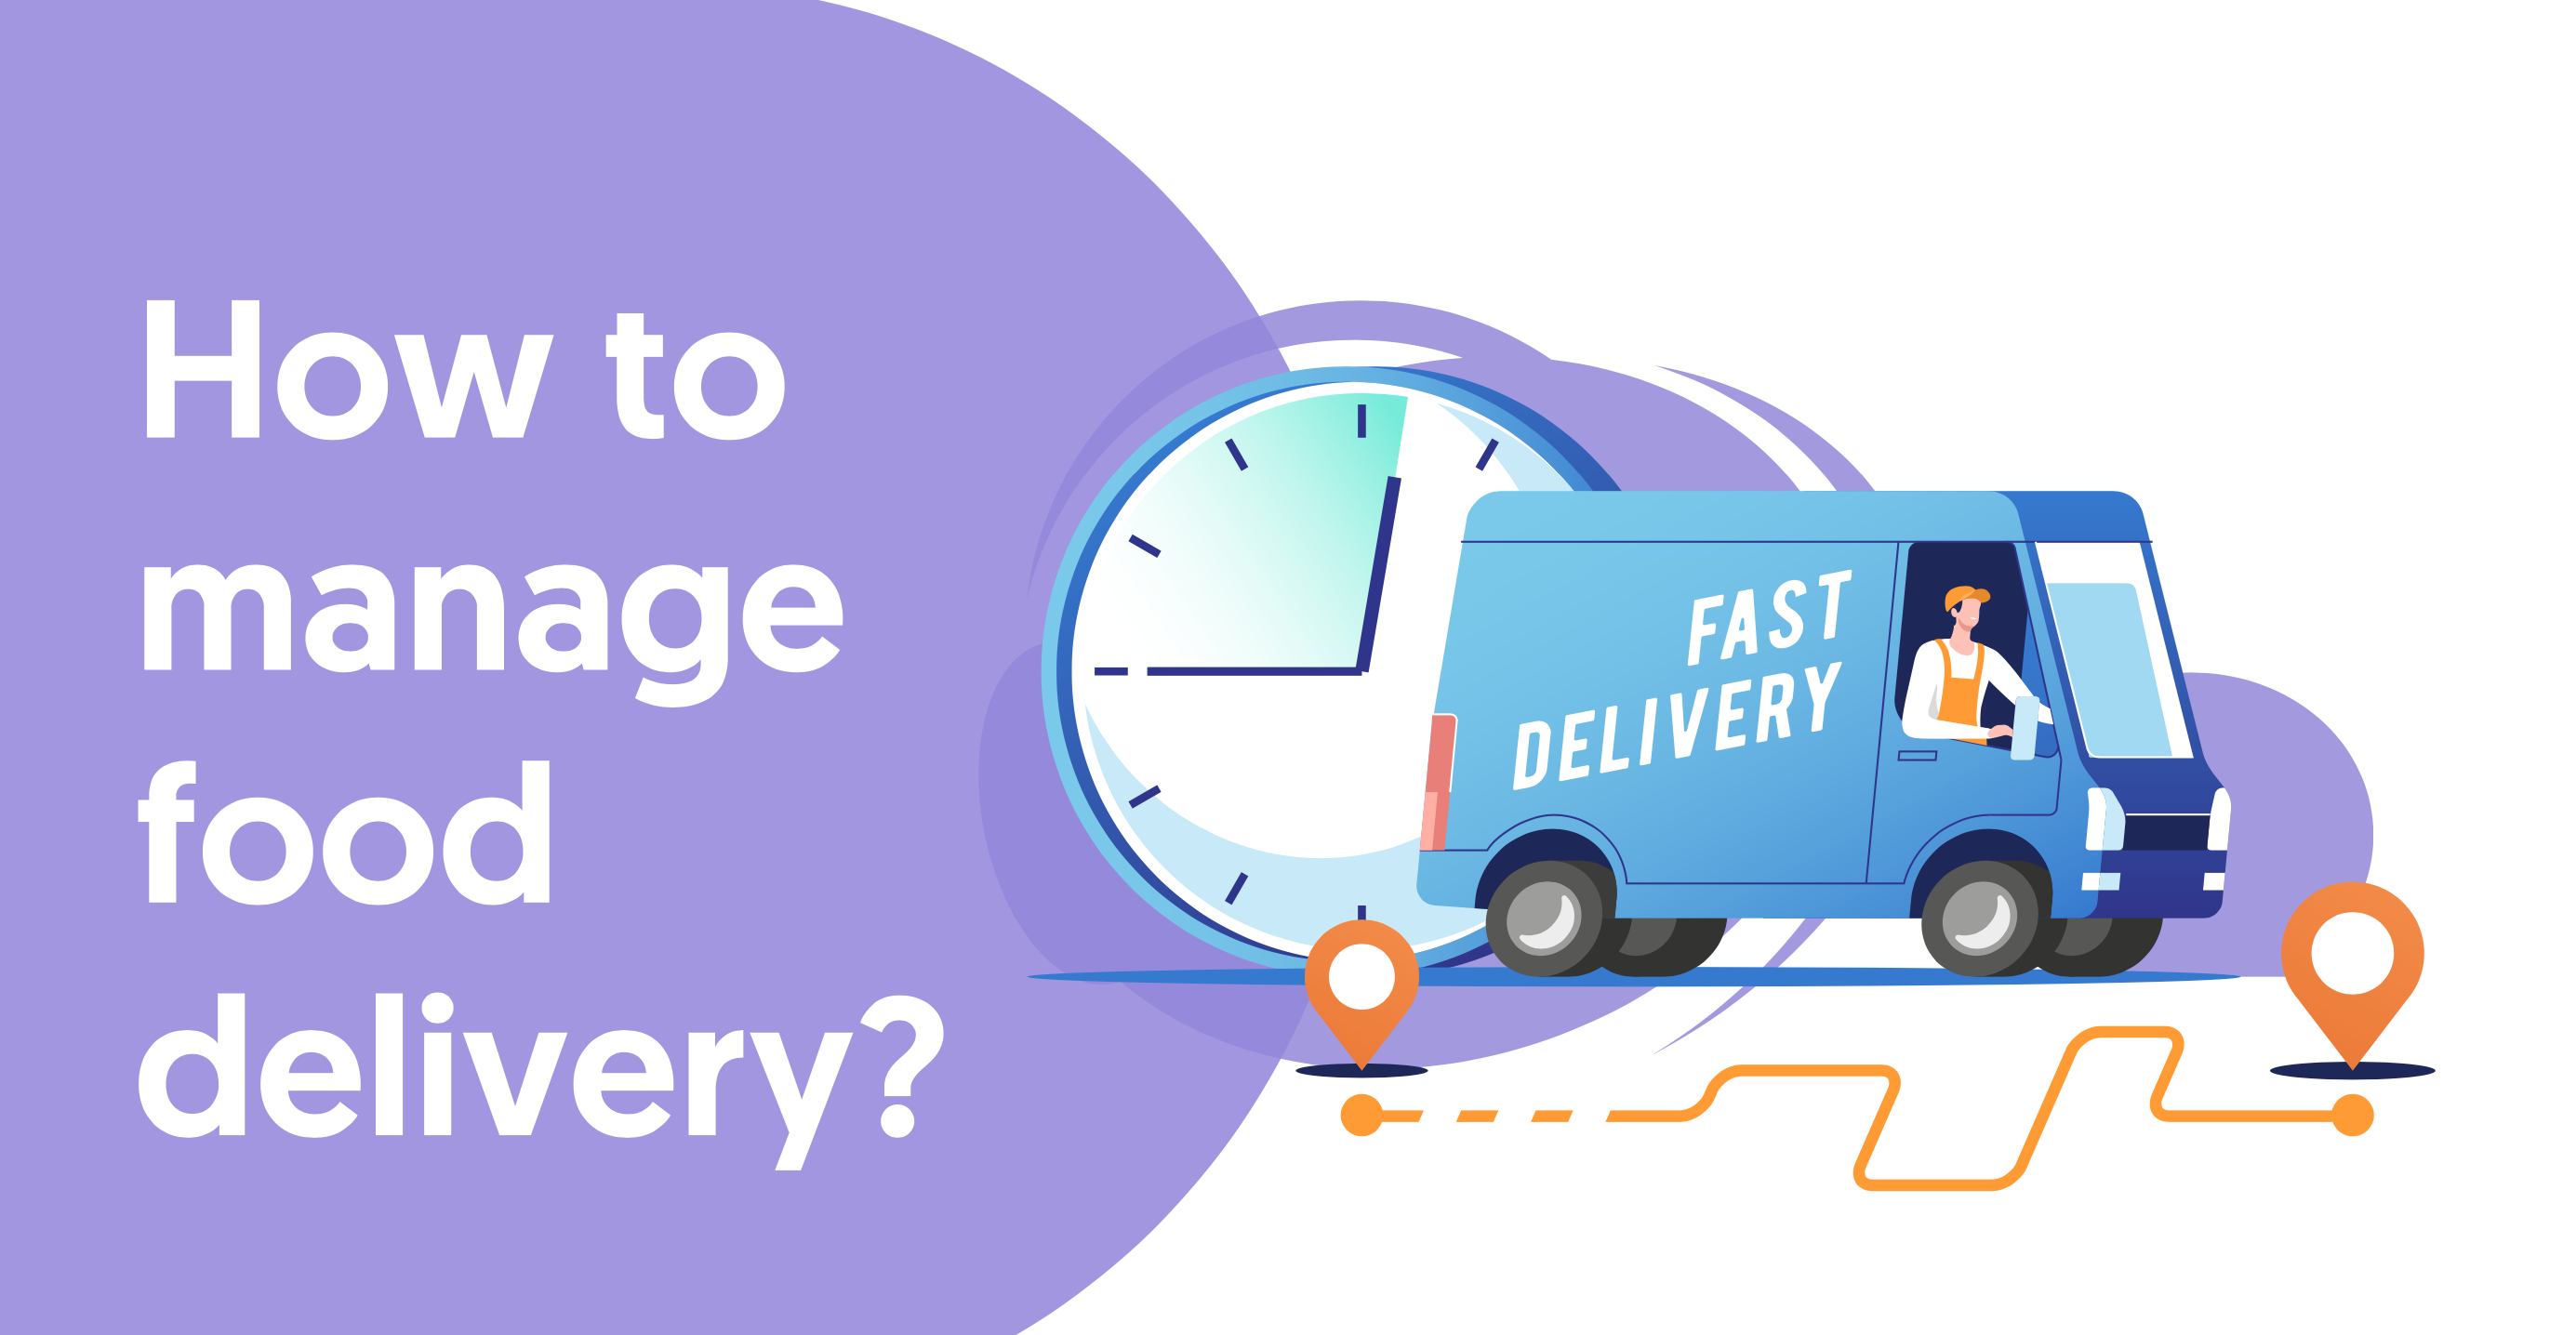 How to manage food delivery